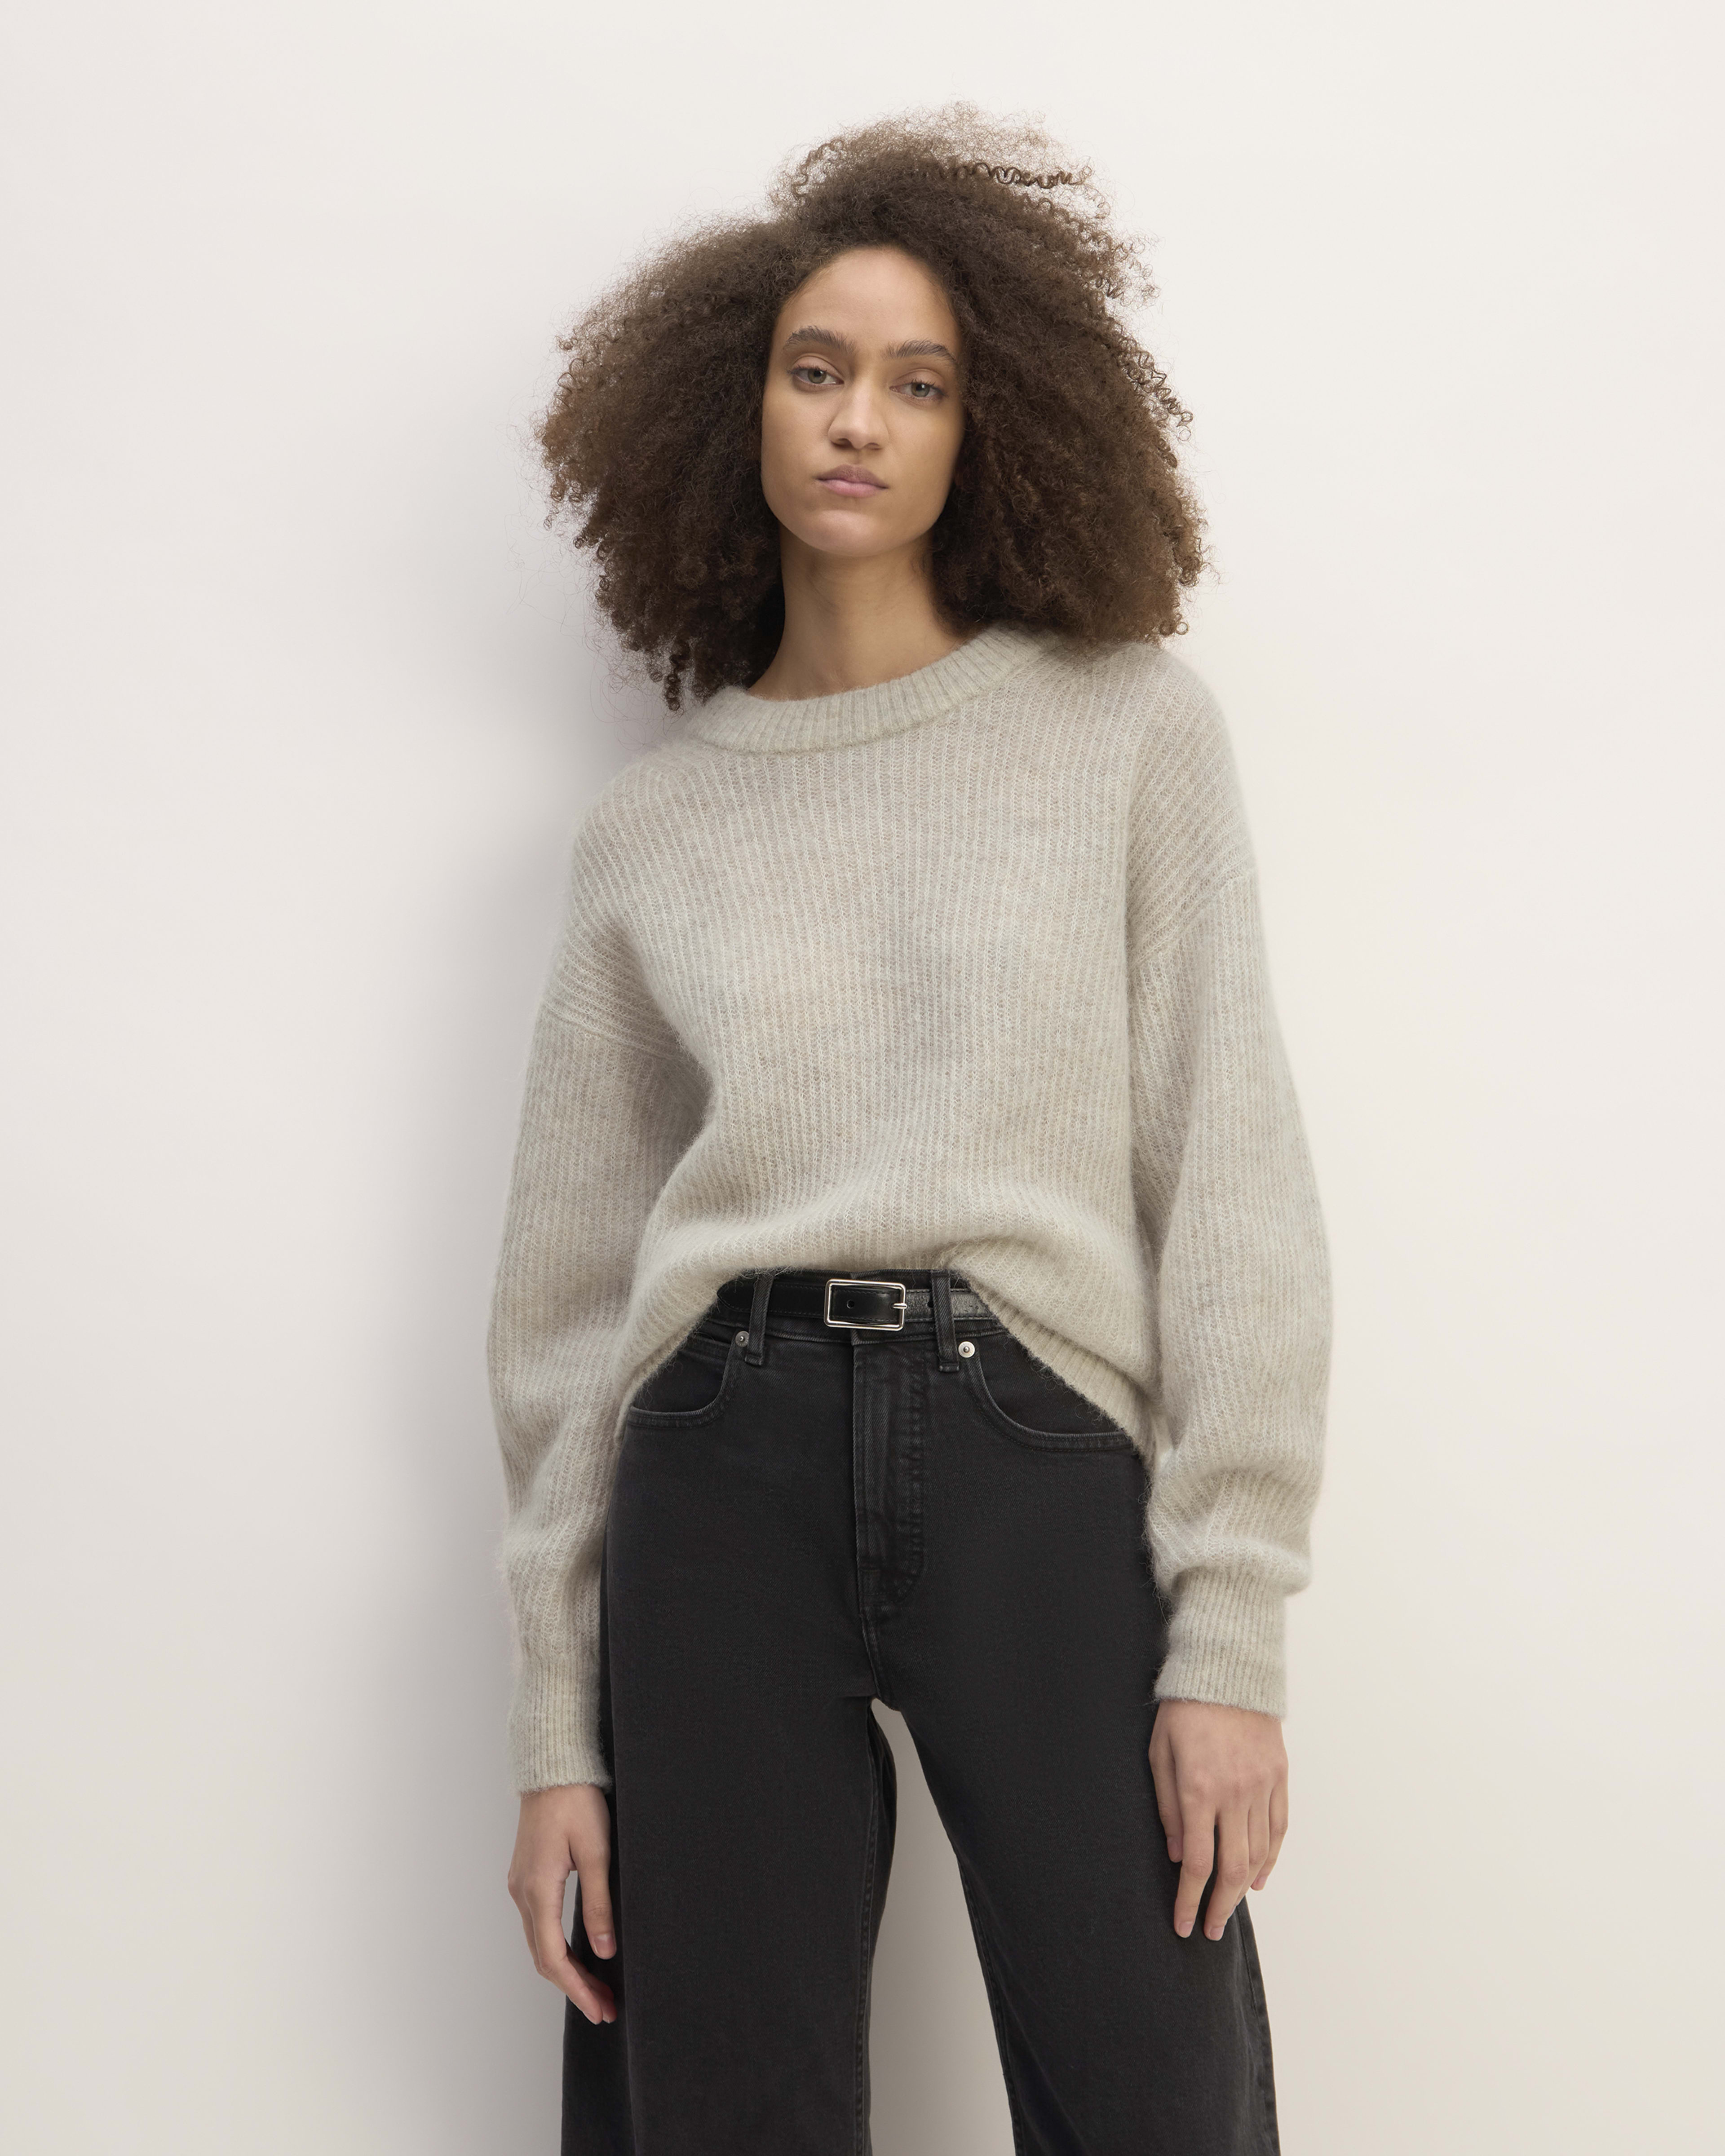 Everlane • Timeless, quality designs at fair, transparent prices • ZERRIN